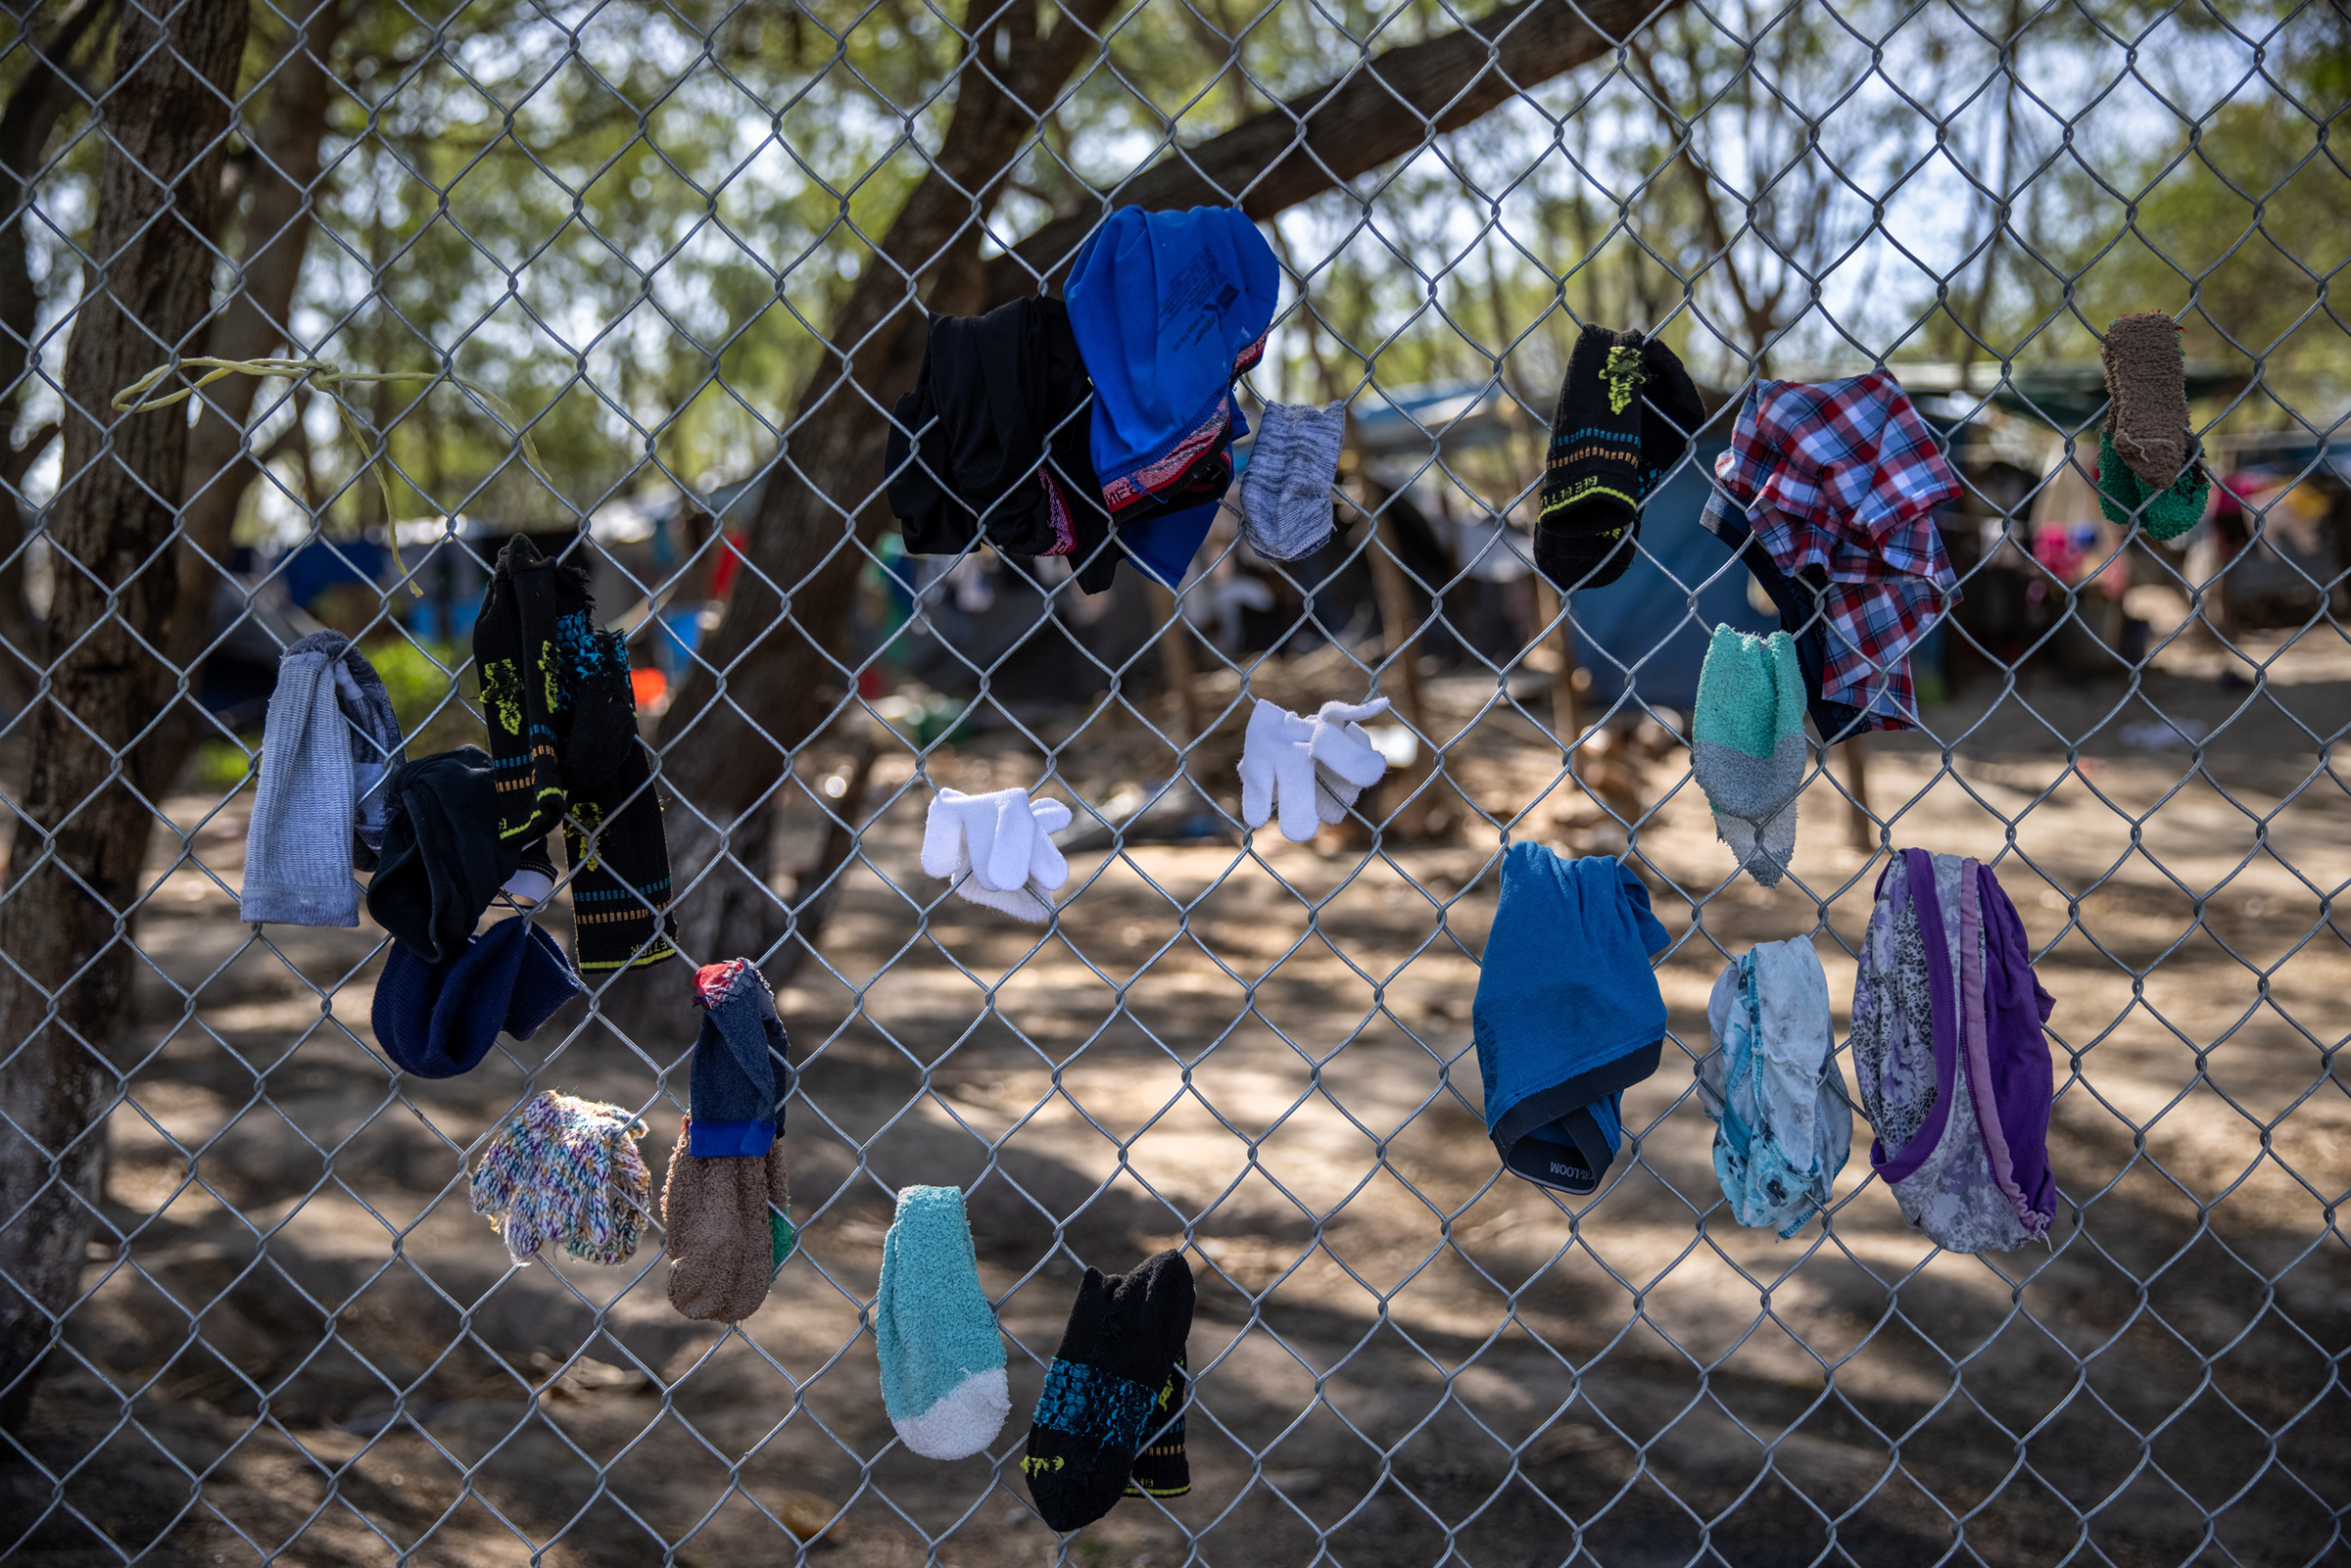 Clothing drying on a fence at a camp for asylum seekers in Matamoros, Mexico, on Feb. 7, 2021. (John Moore—Getty Images)